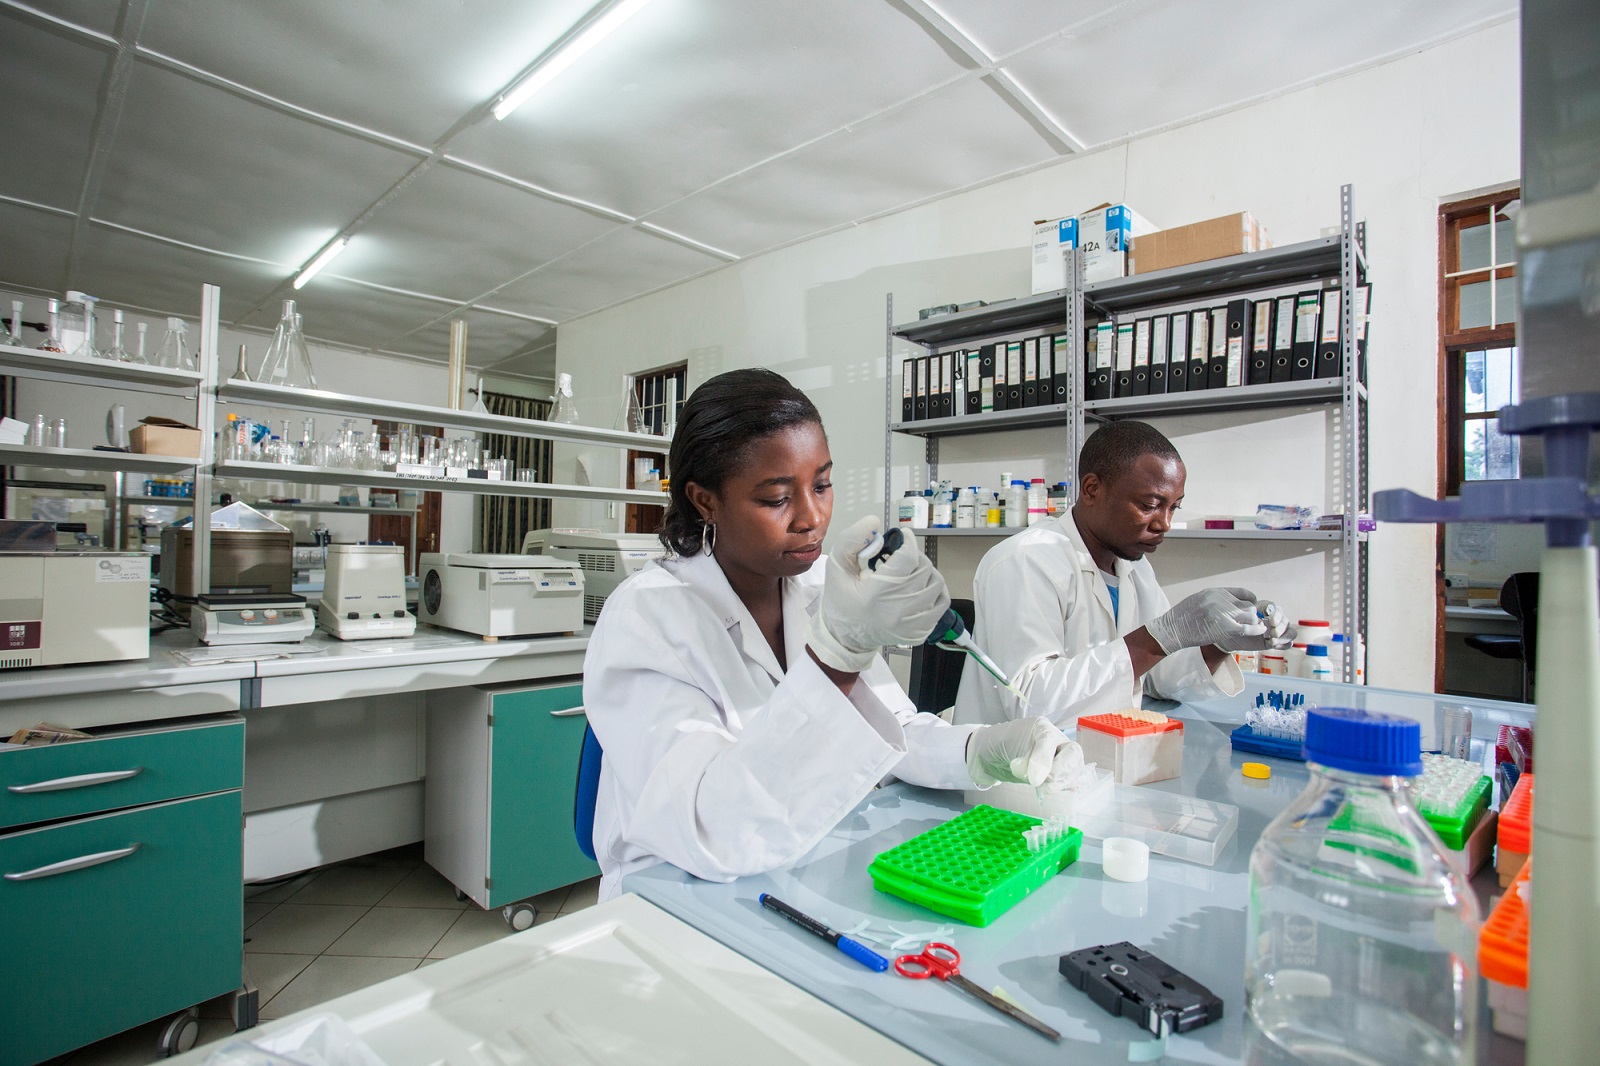 Lab technicians Deogratius Roman and Violet Francis get mosquito samples ready for DNA extraction in Ikafara Health Institute laboratory in Ifakara, Tanzania.